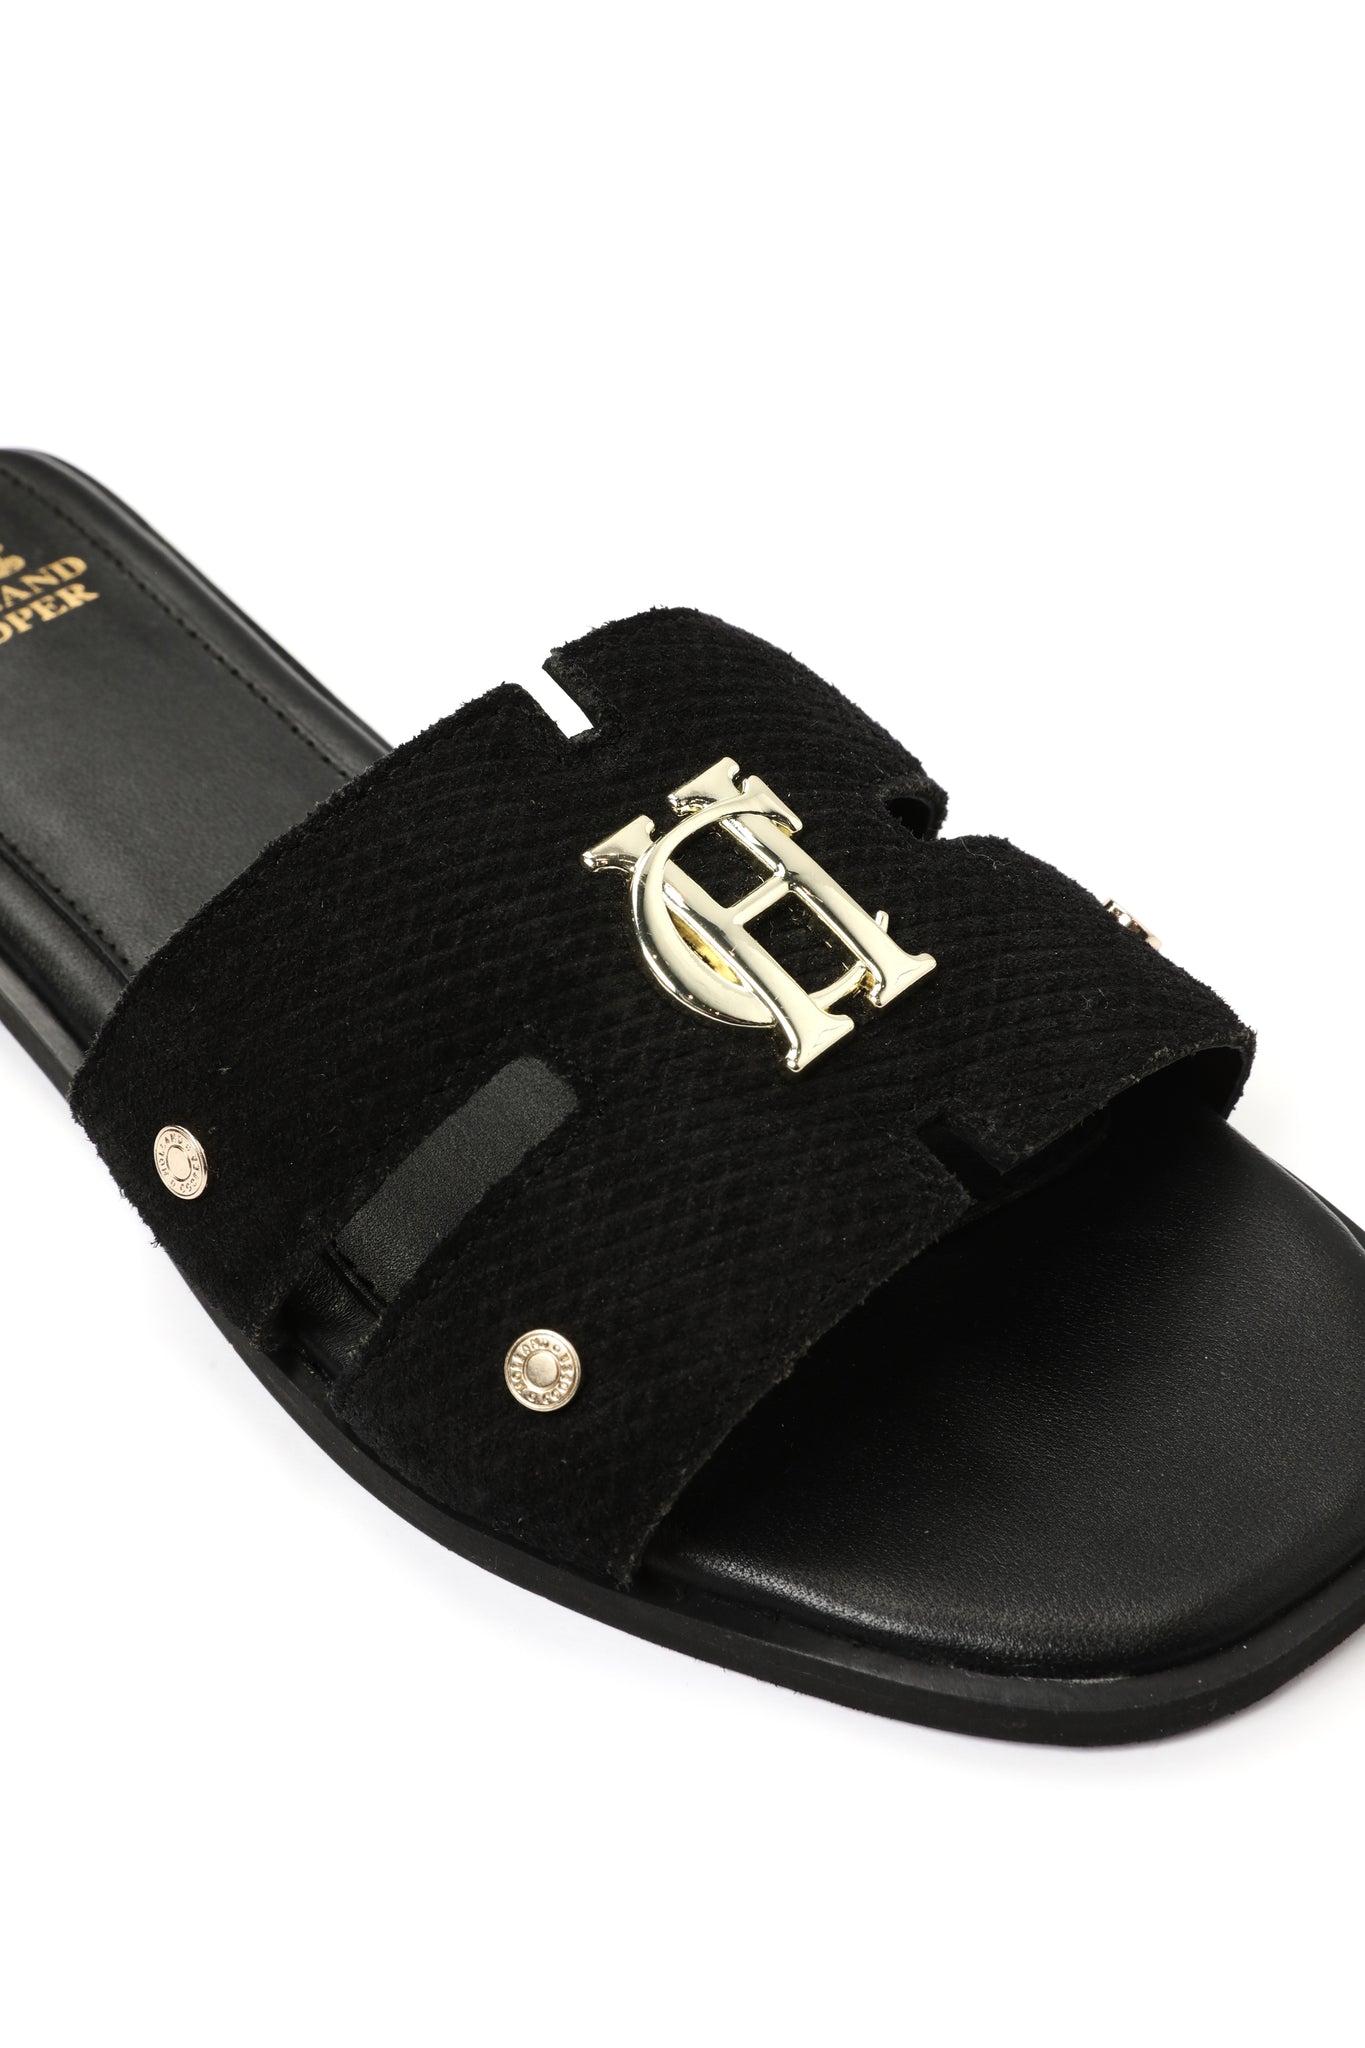 Close up of black suede sliders with a black leather sole and gold hardware. 